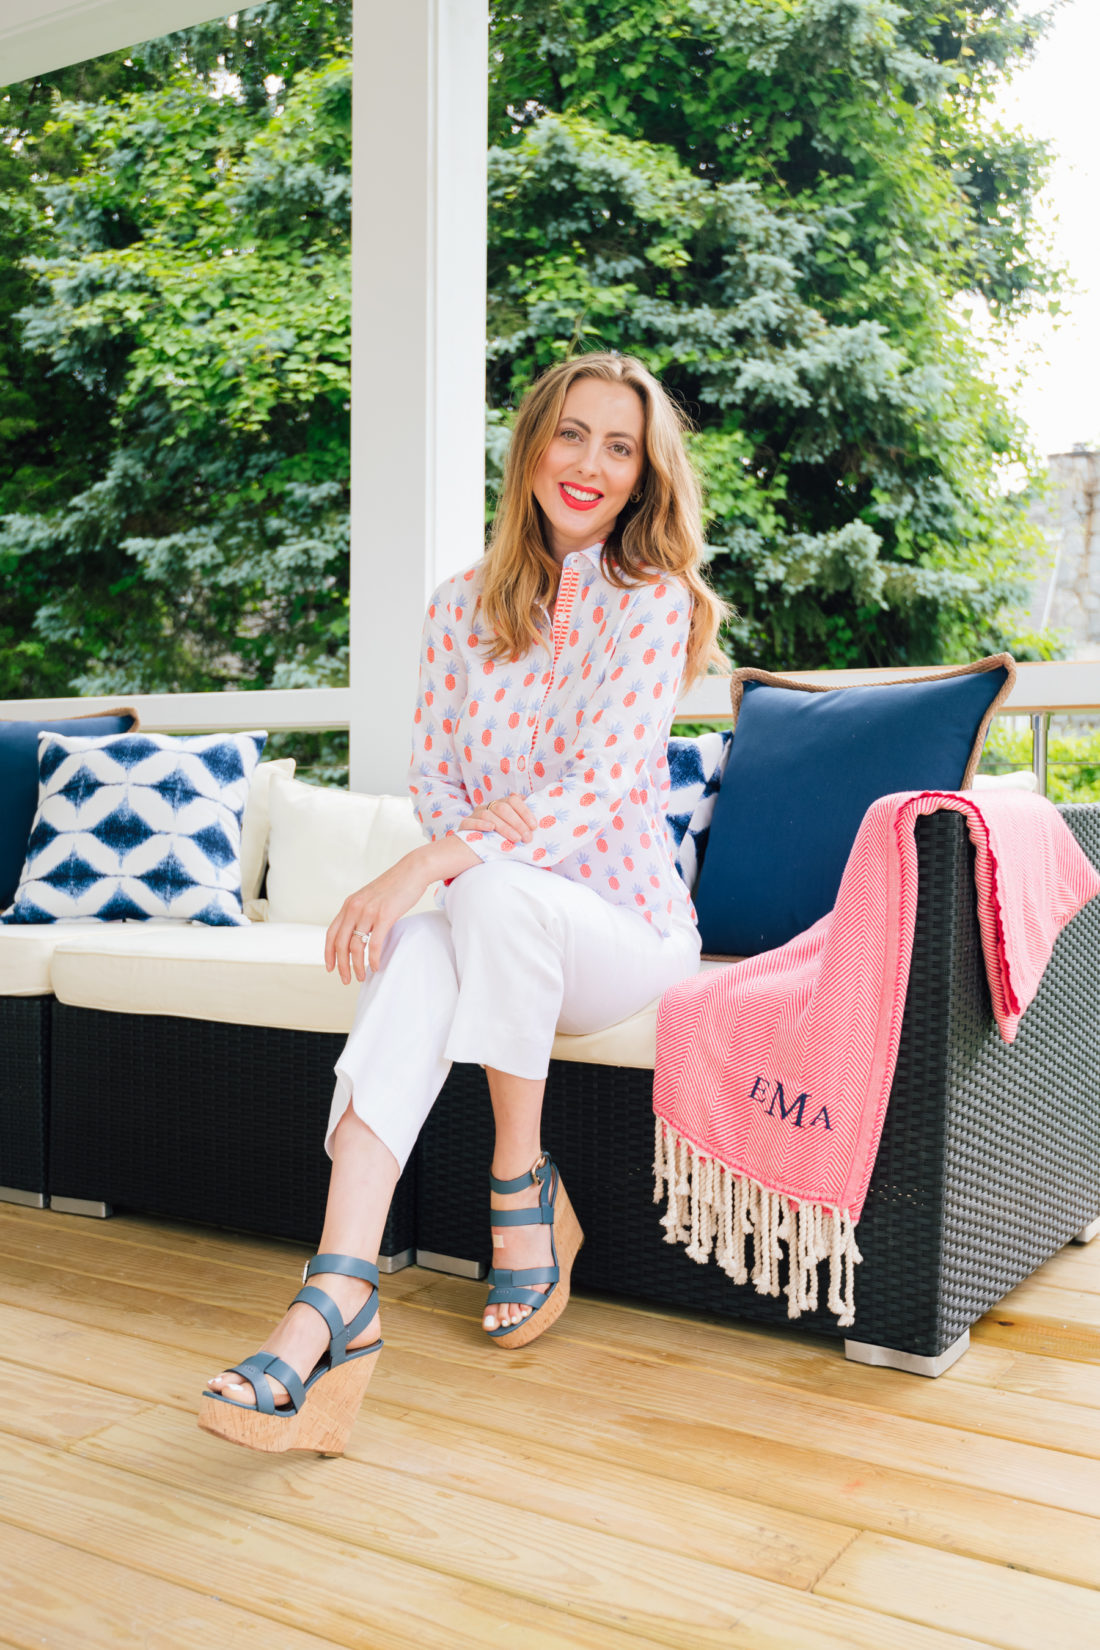 Eva Amurri Martino hangs out on the couch at her summer clambake